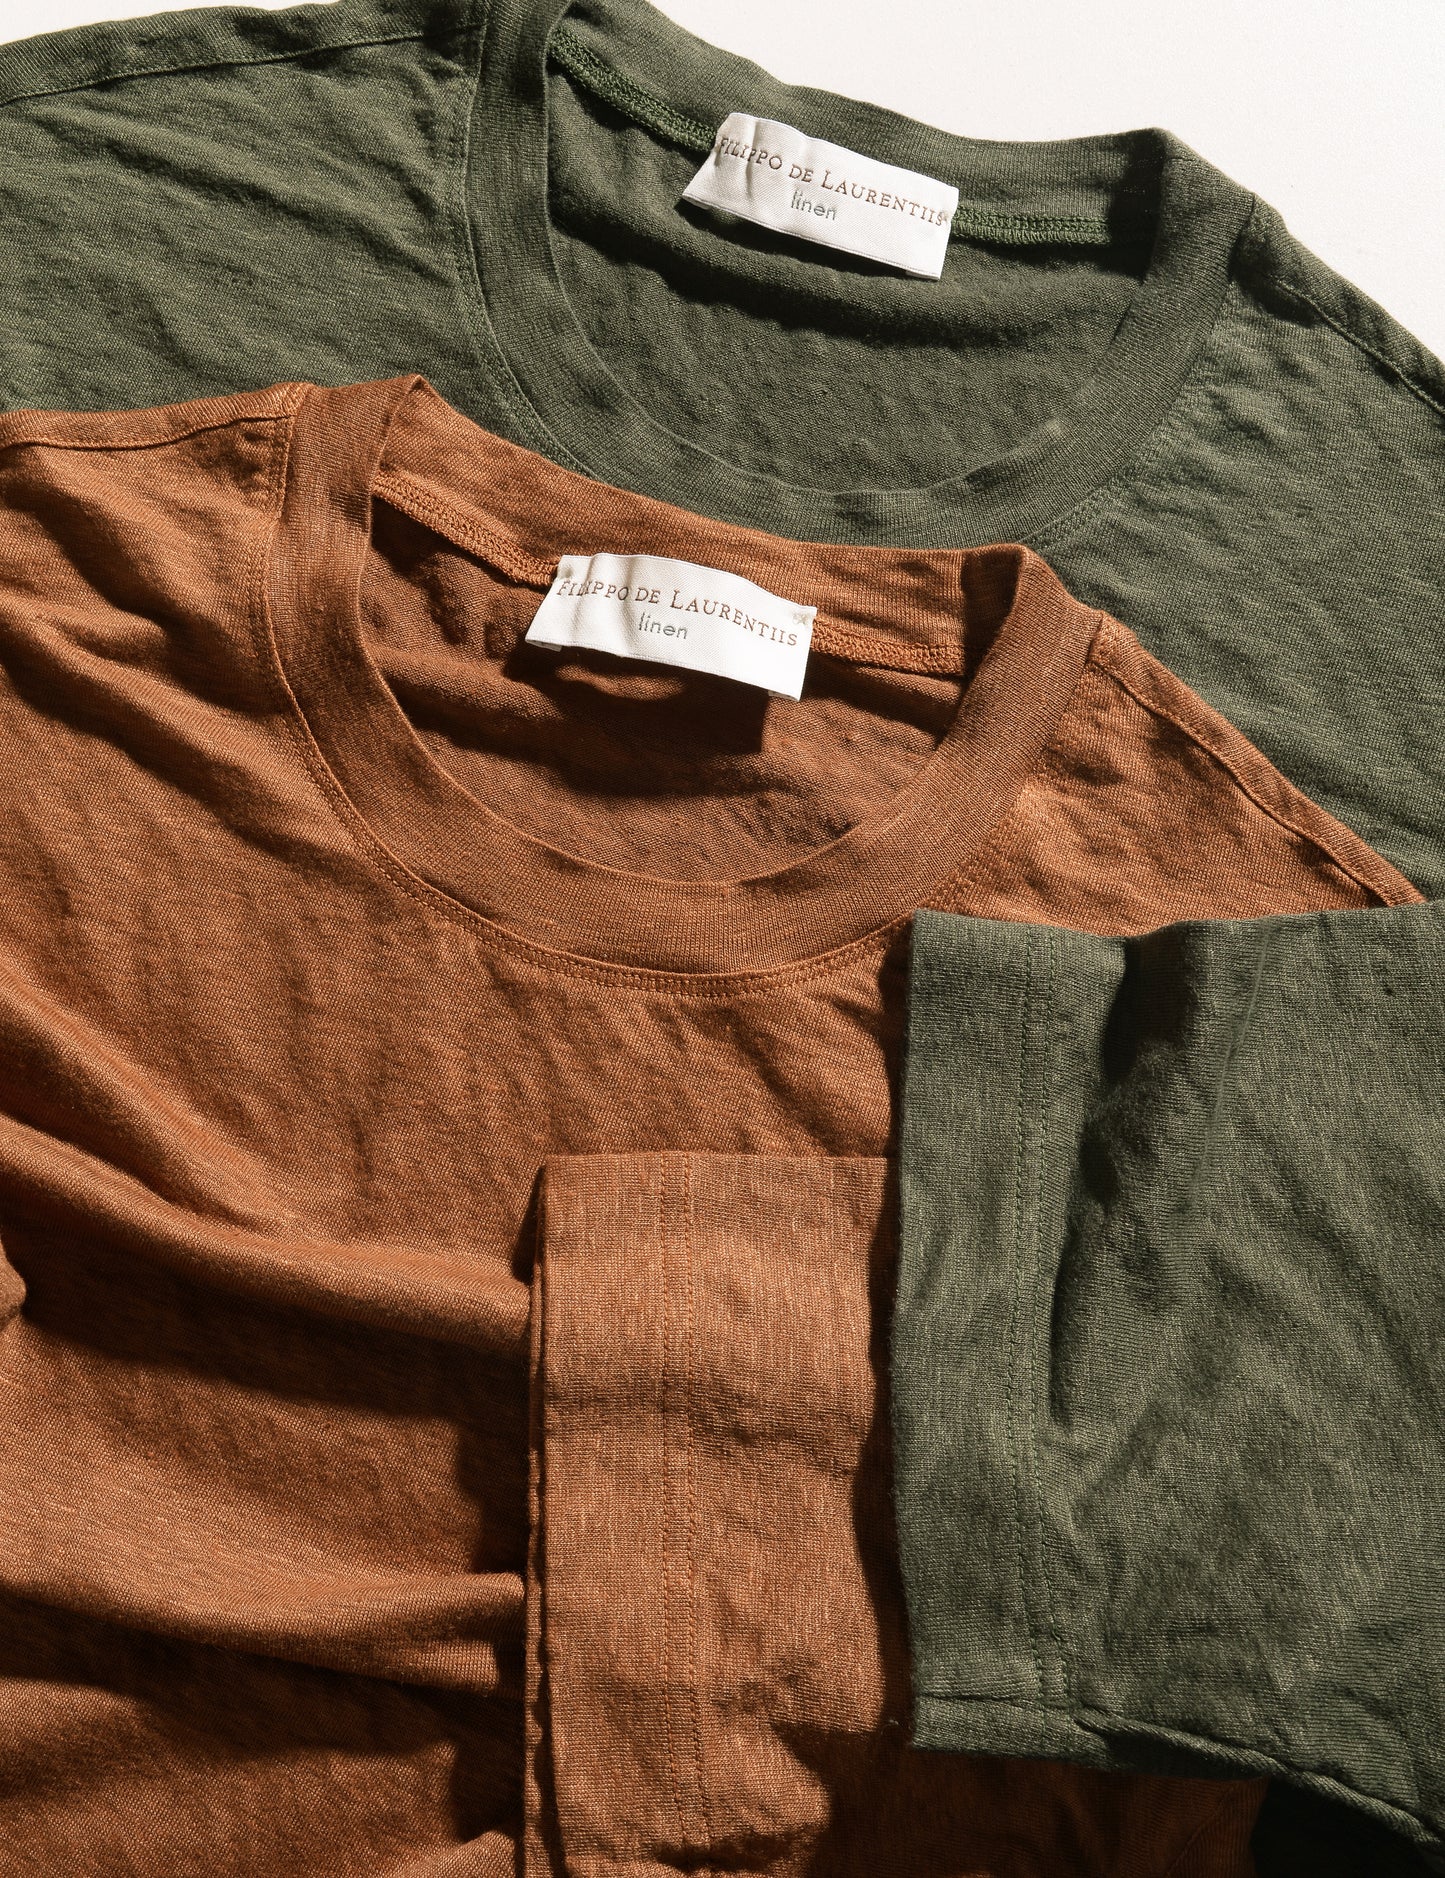 Detail shot of two colors of Filippo de Laurentiis Linen Knit Tees to show colors, neck, and cuffs